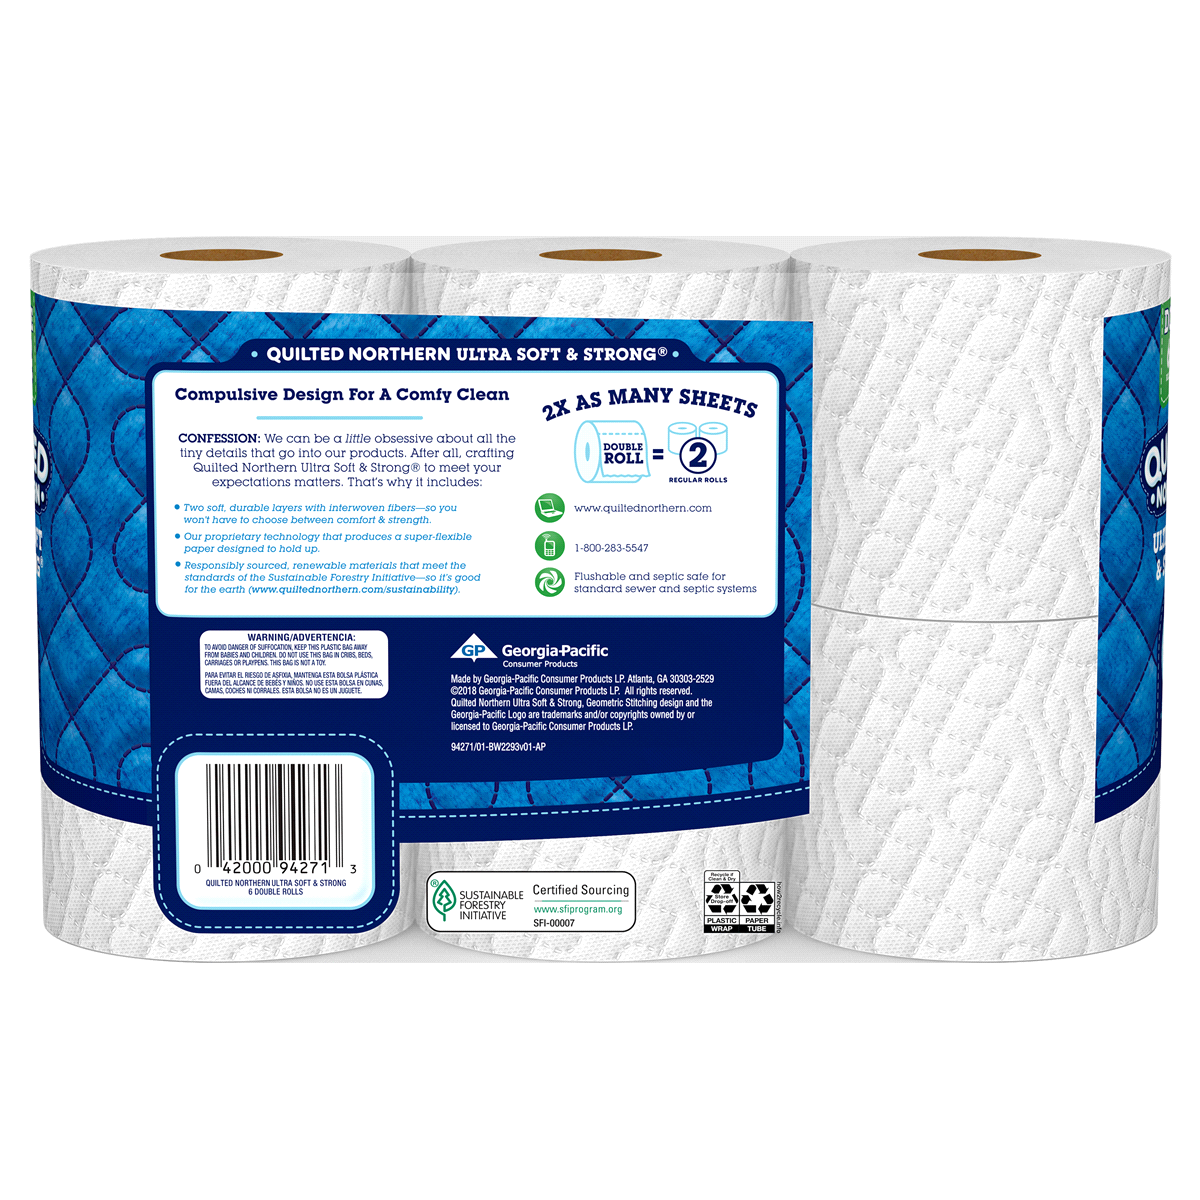 slide 7 of 8, Quilted Northern Ultra Soft & Strong Toilet Paper, Double Rolls, 6 ct